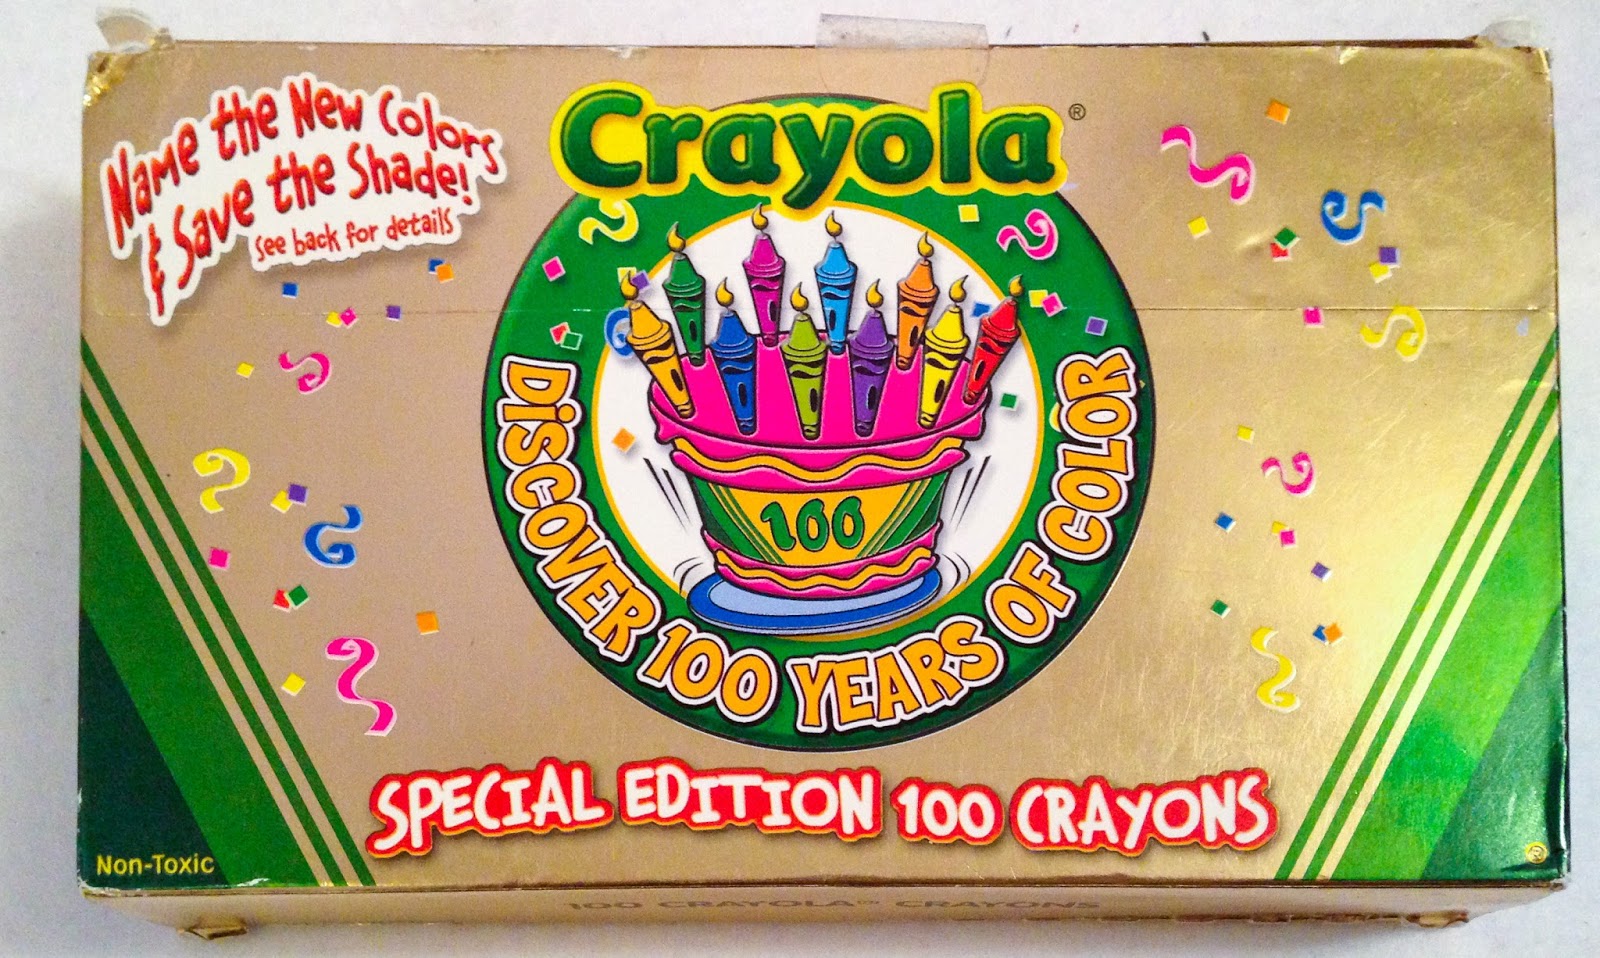 Crayola 100 Colored Pencils: What's Inside the Box